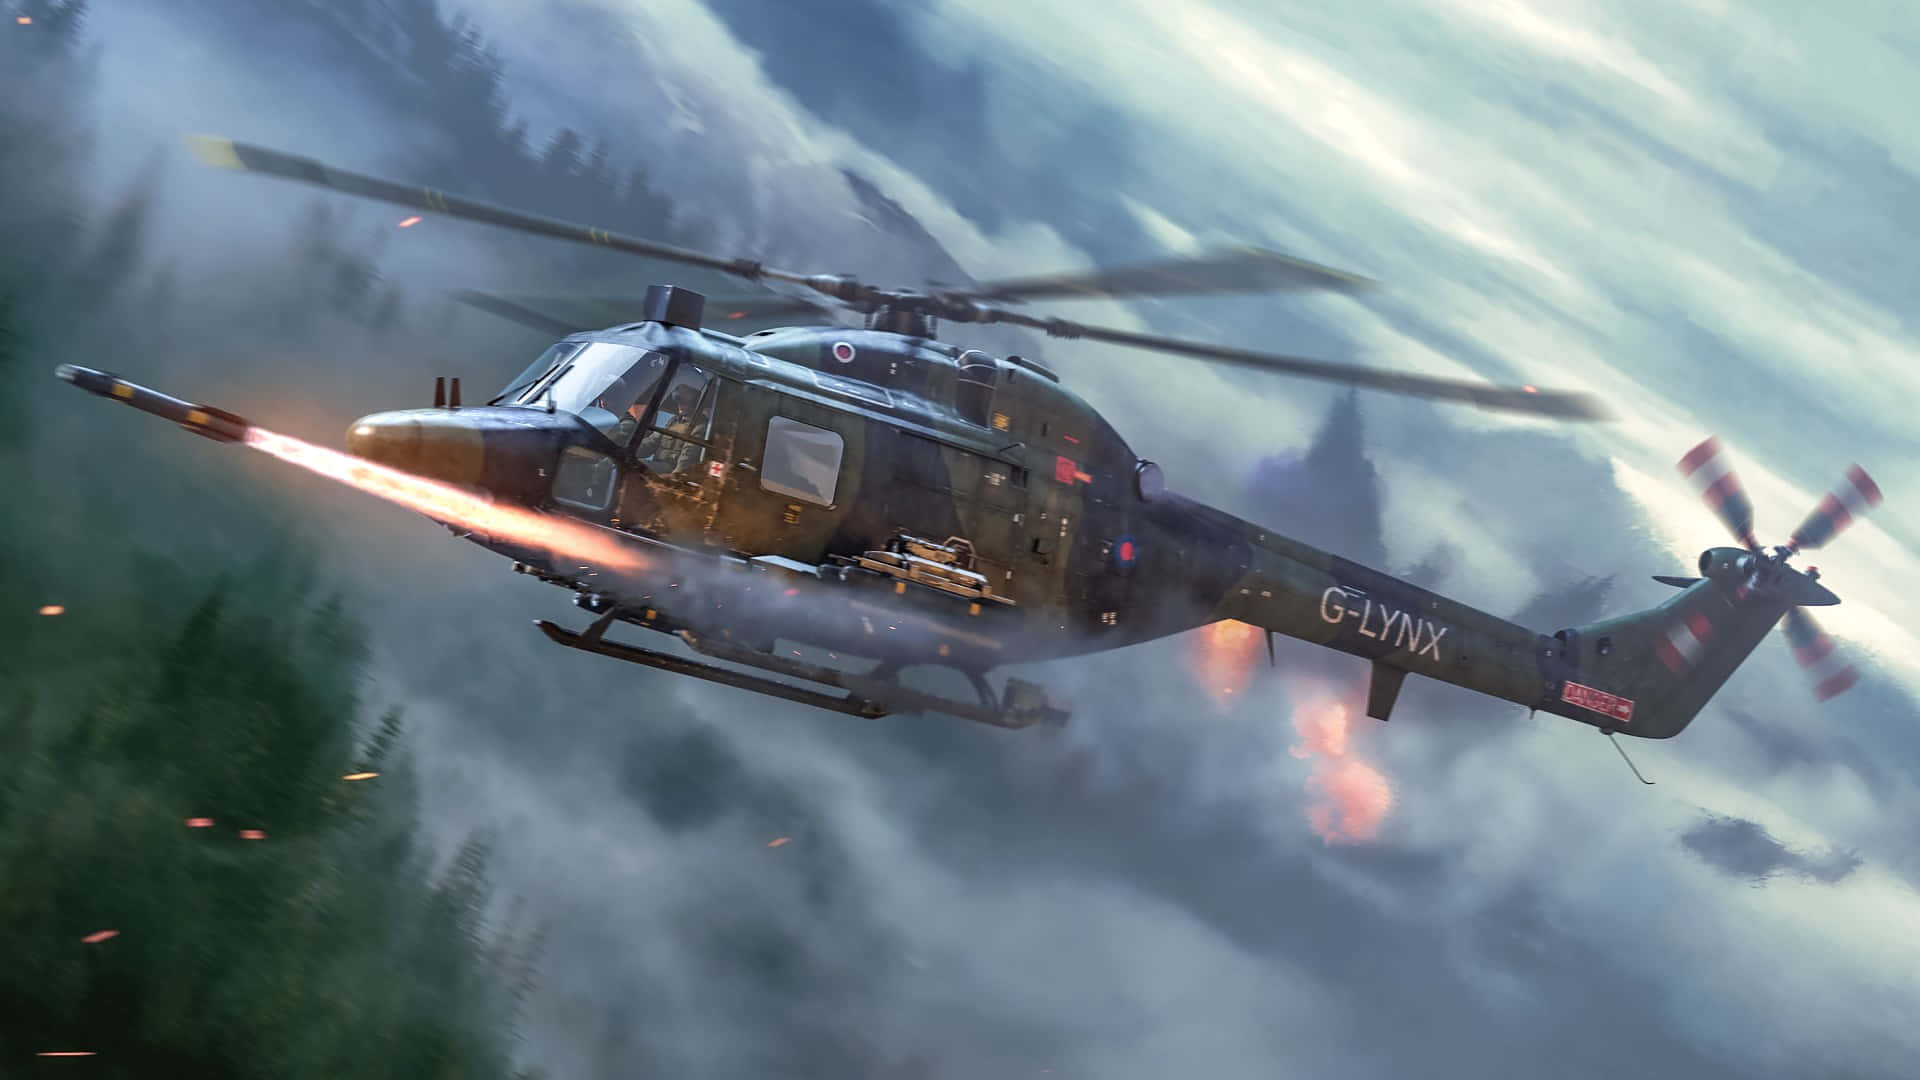 Westland Lynx Helicopters Wallpaper